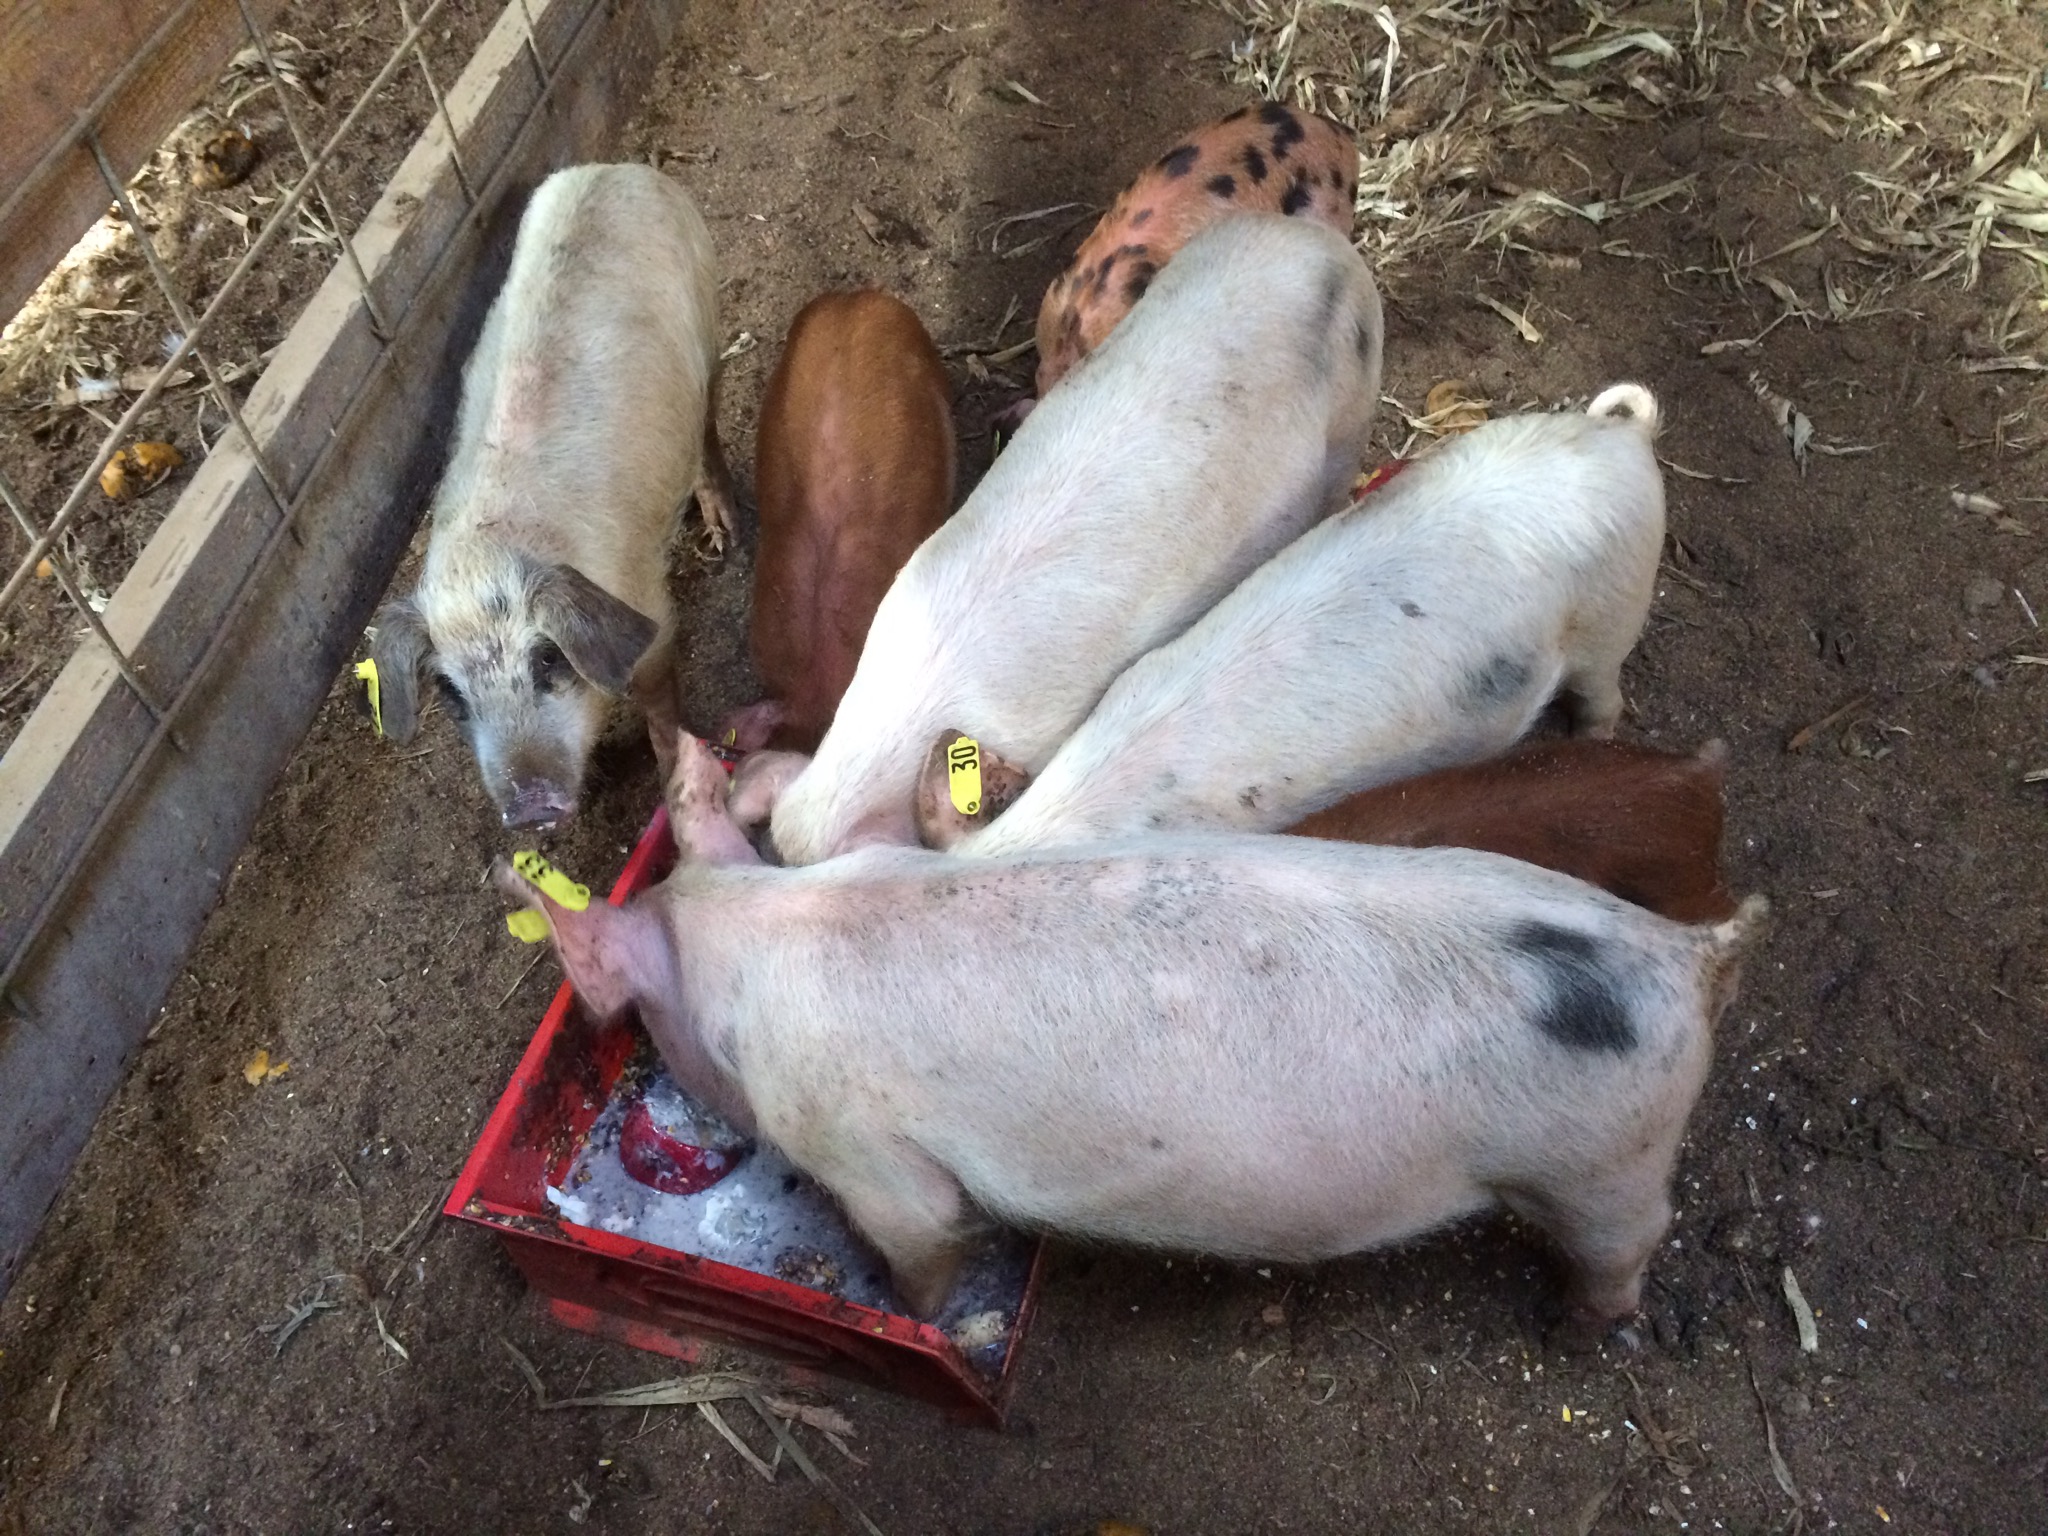 Some of the sick pigs, with their head in the trough.